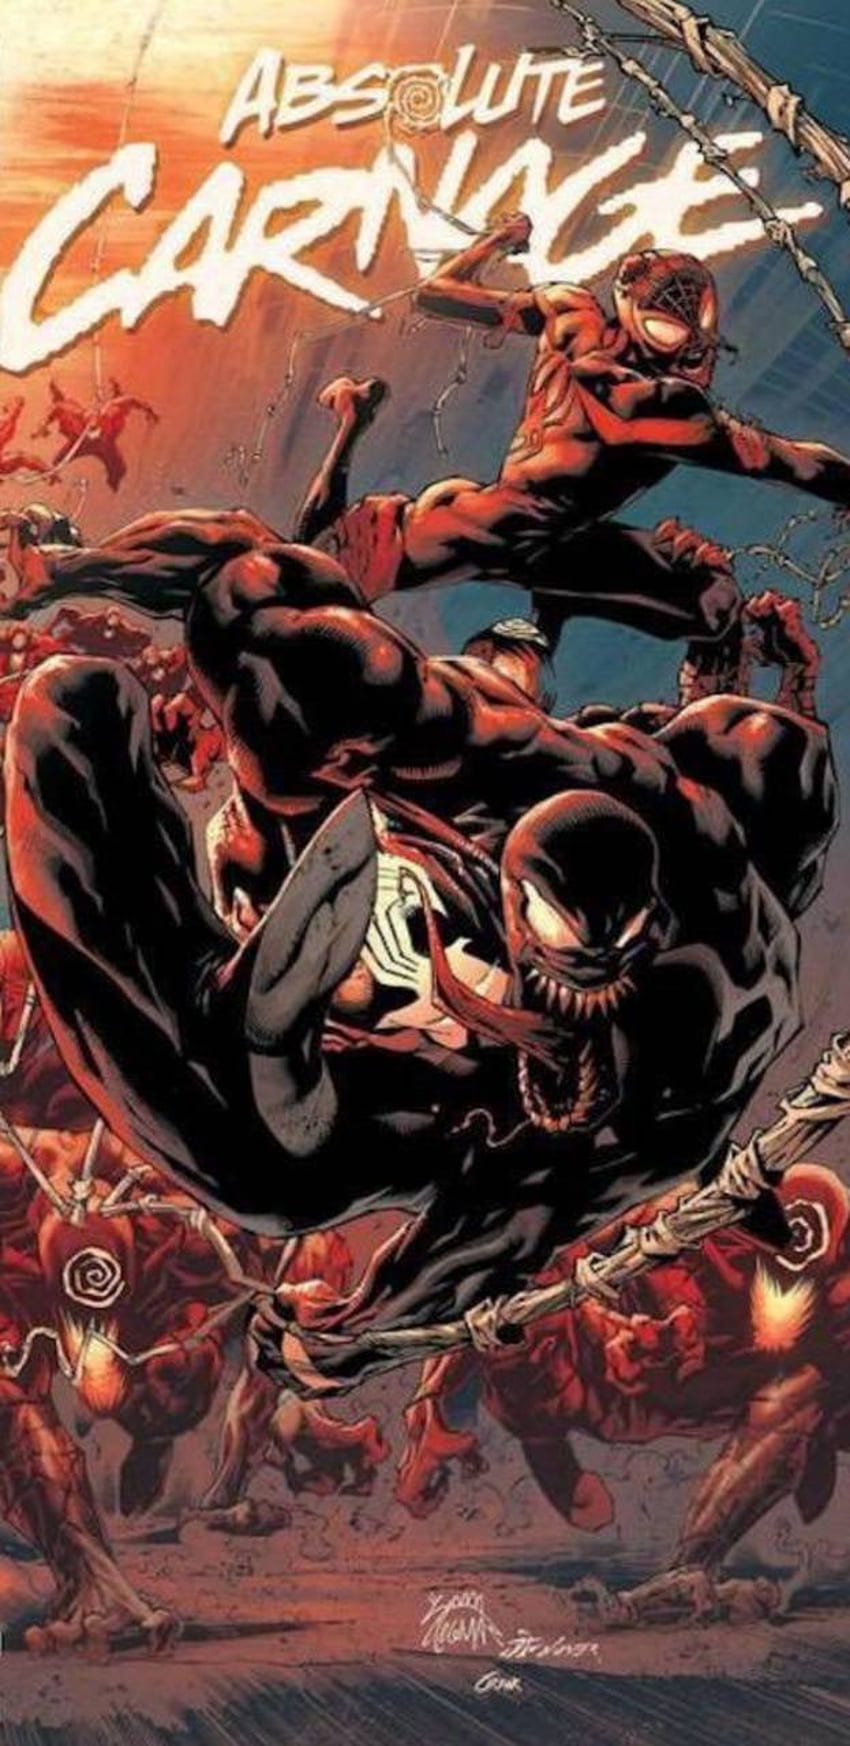 Absolute Carnage HD phone wallpaper